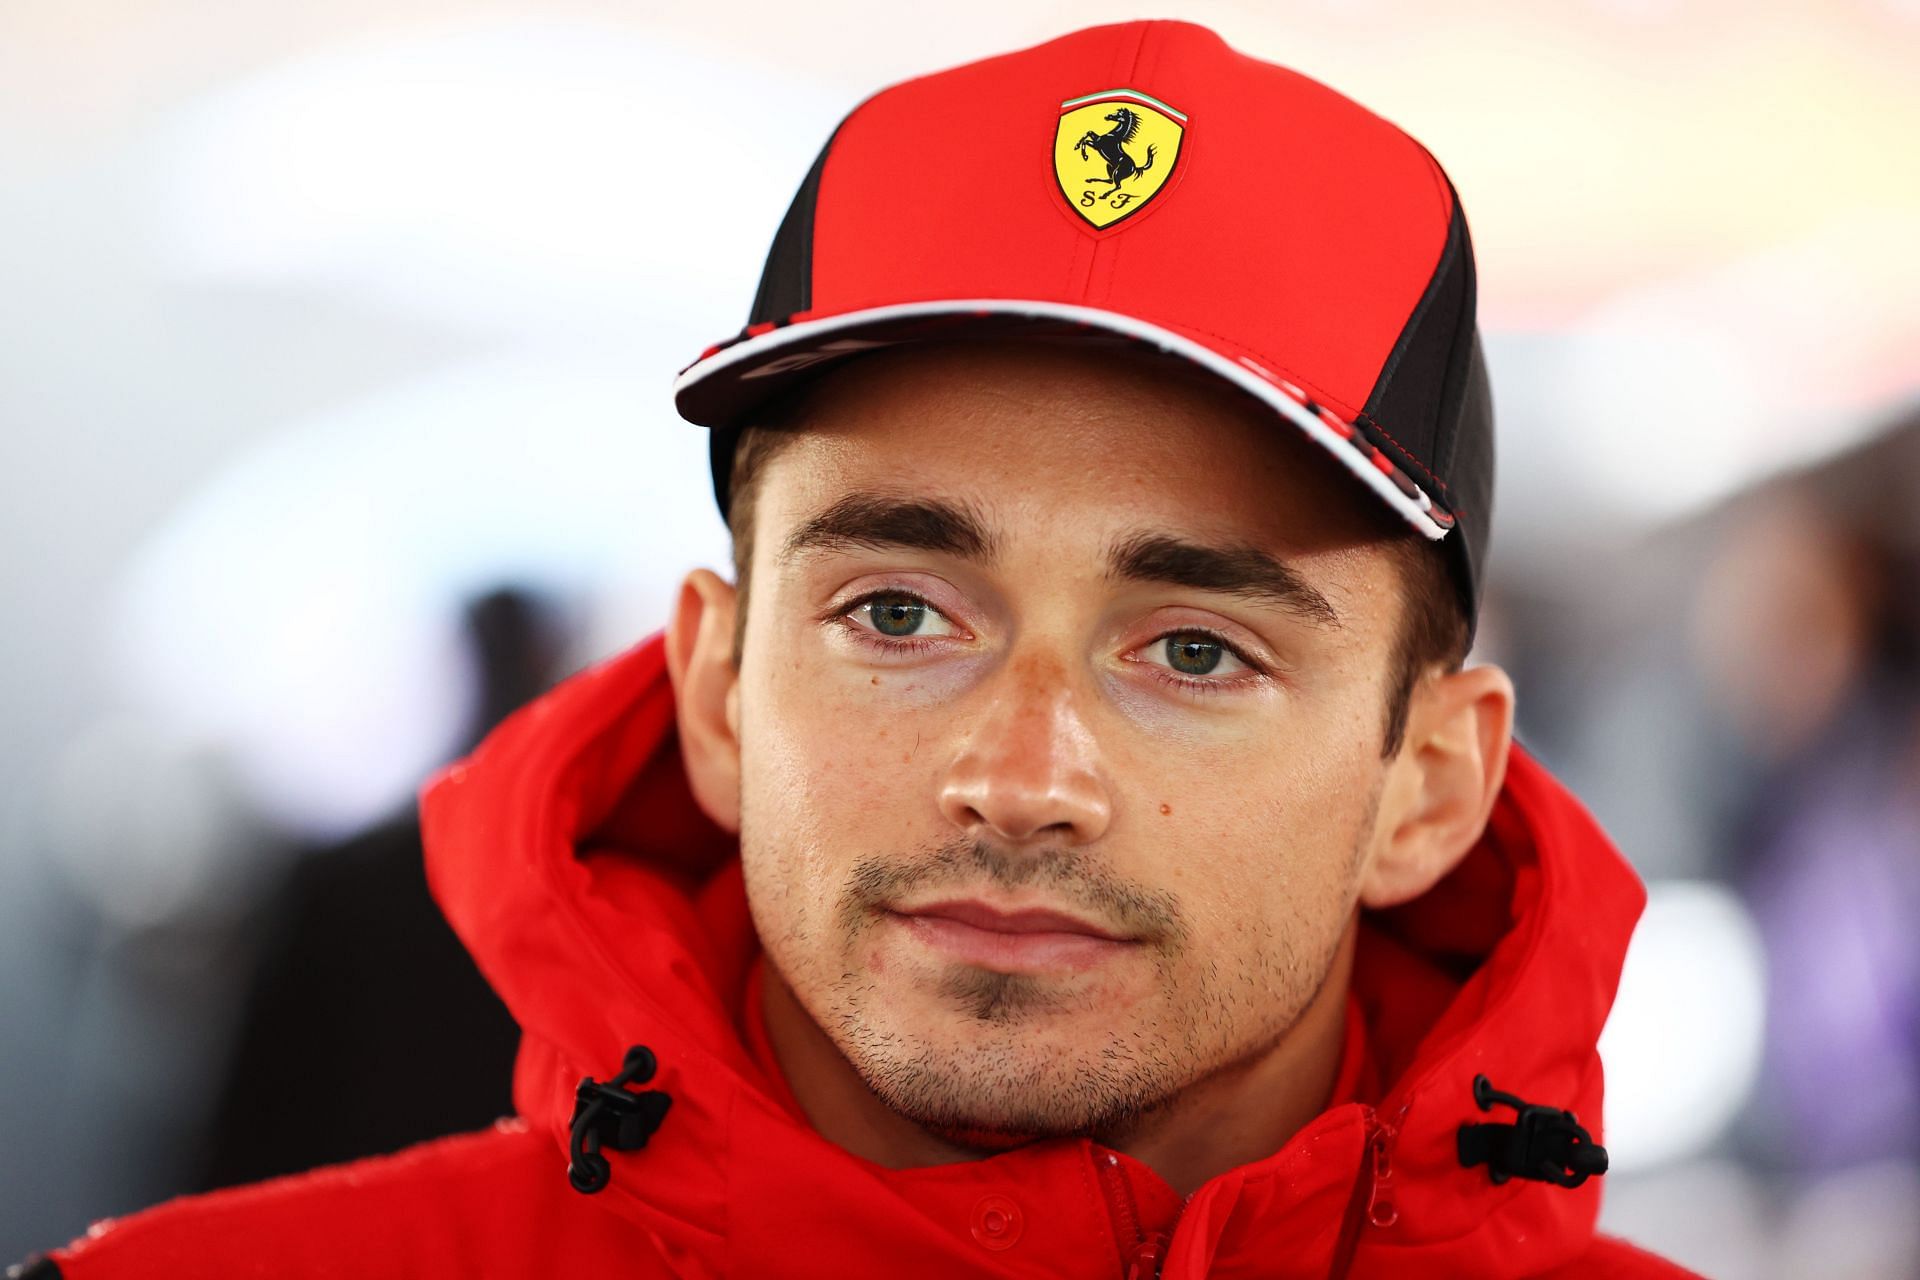 Charles Leclerc fell victim to a robbery earlier this week